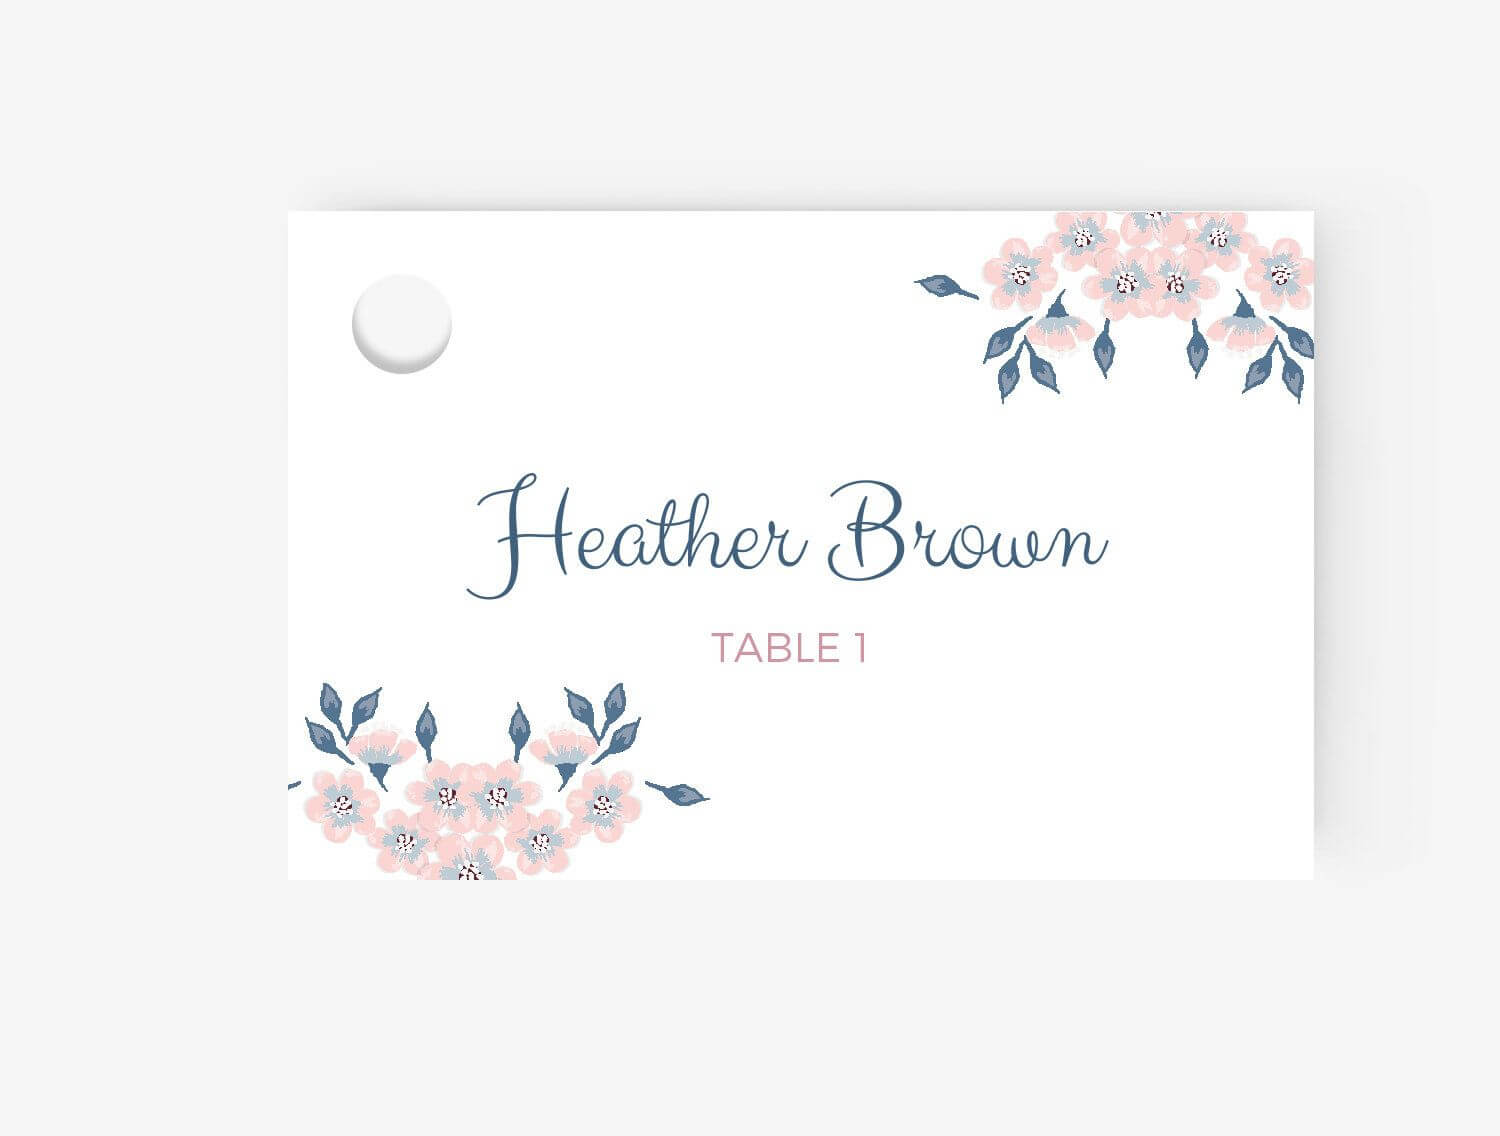 005 Free Place Card Template Ideas Cards Excellent Name With Regard To Free Place Card Templates 6 Per Page